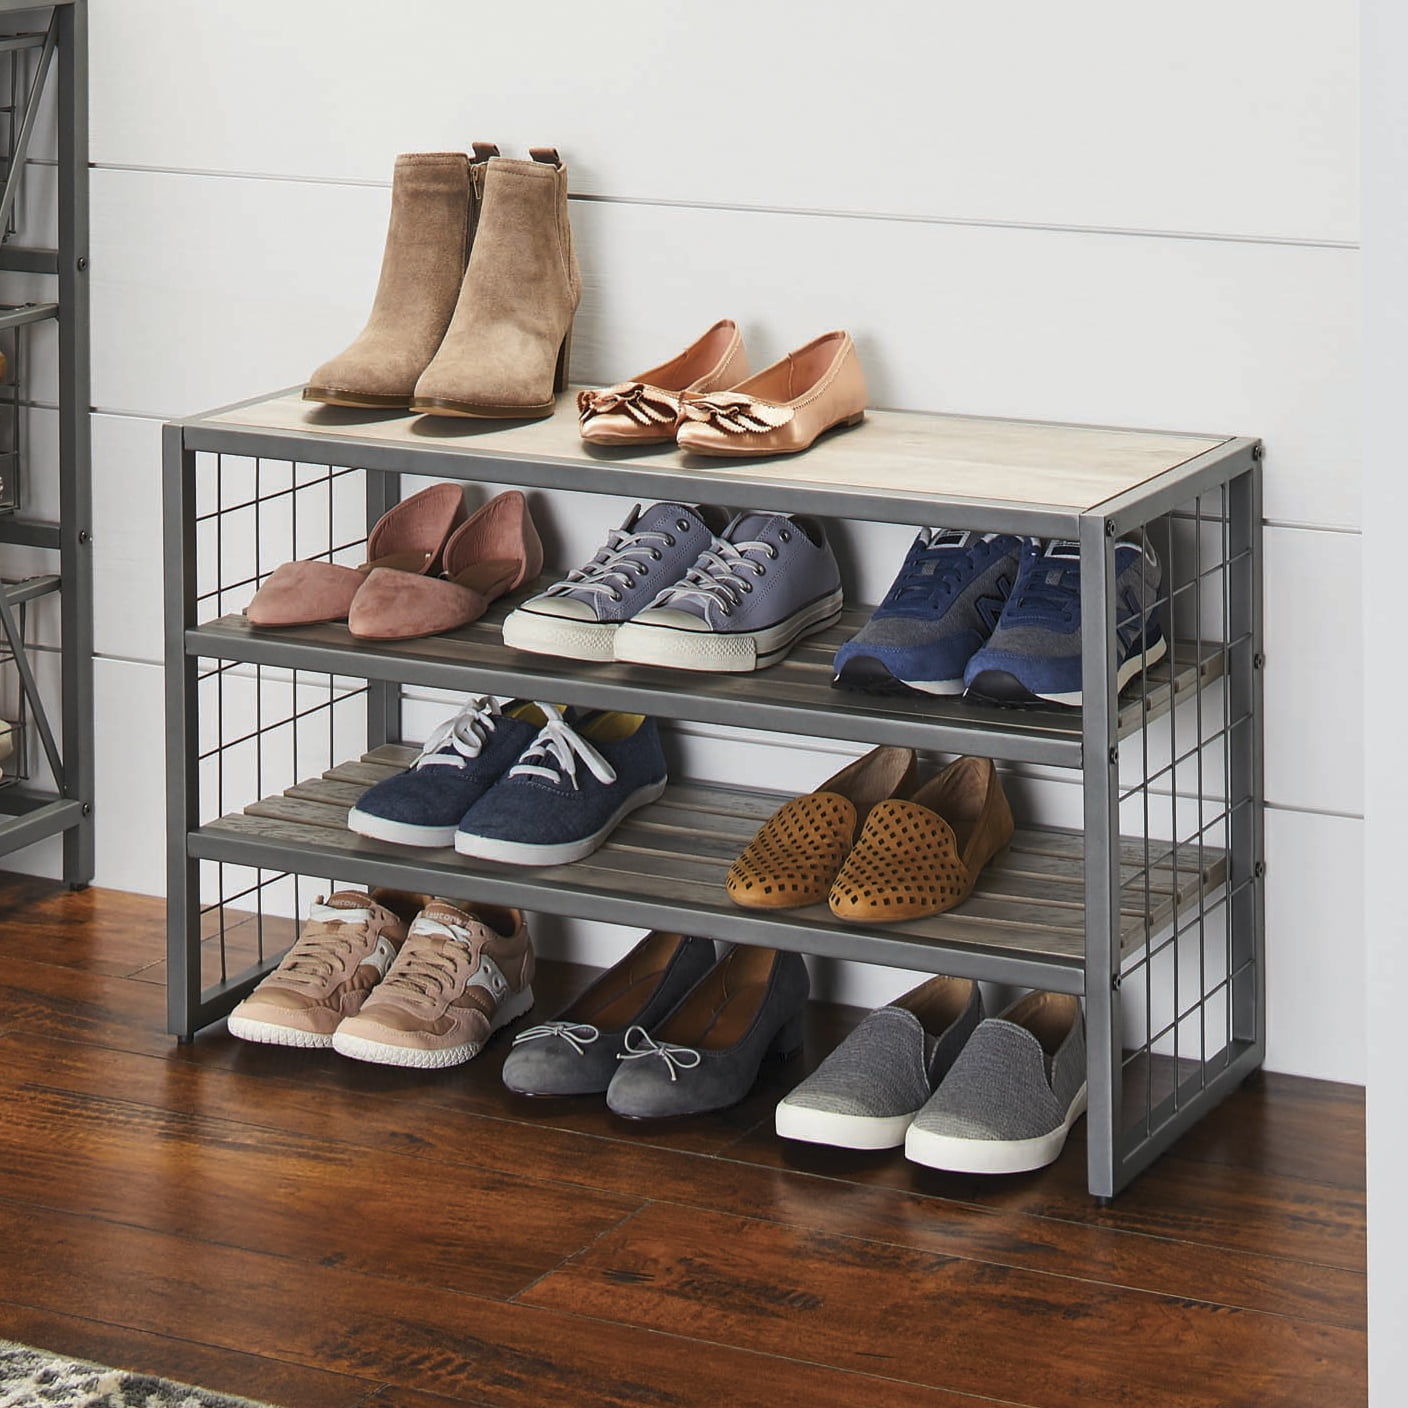 Better Homes & Gardens 4 Tier Shoe Rack with Gunmetal Grey Wood and Metal Frame, up to 12 Pair of shoes